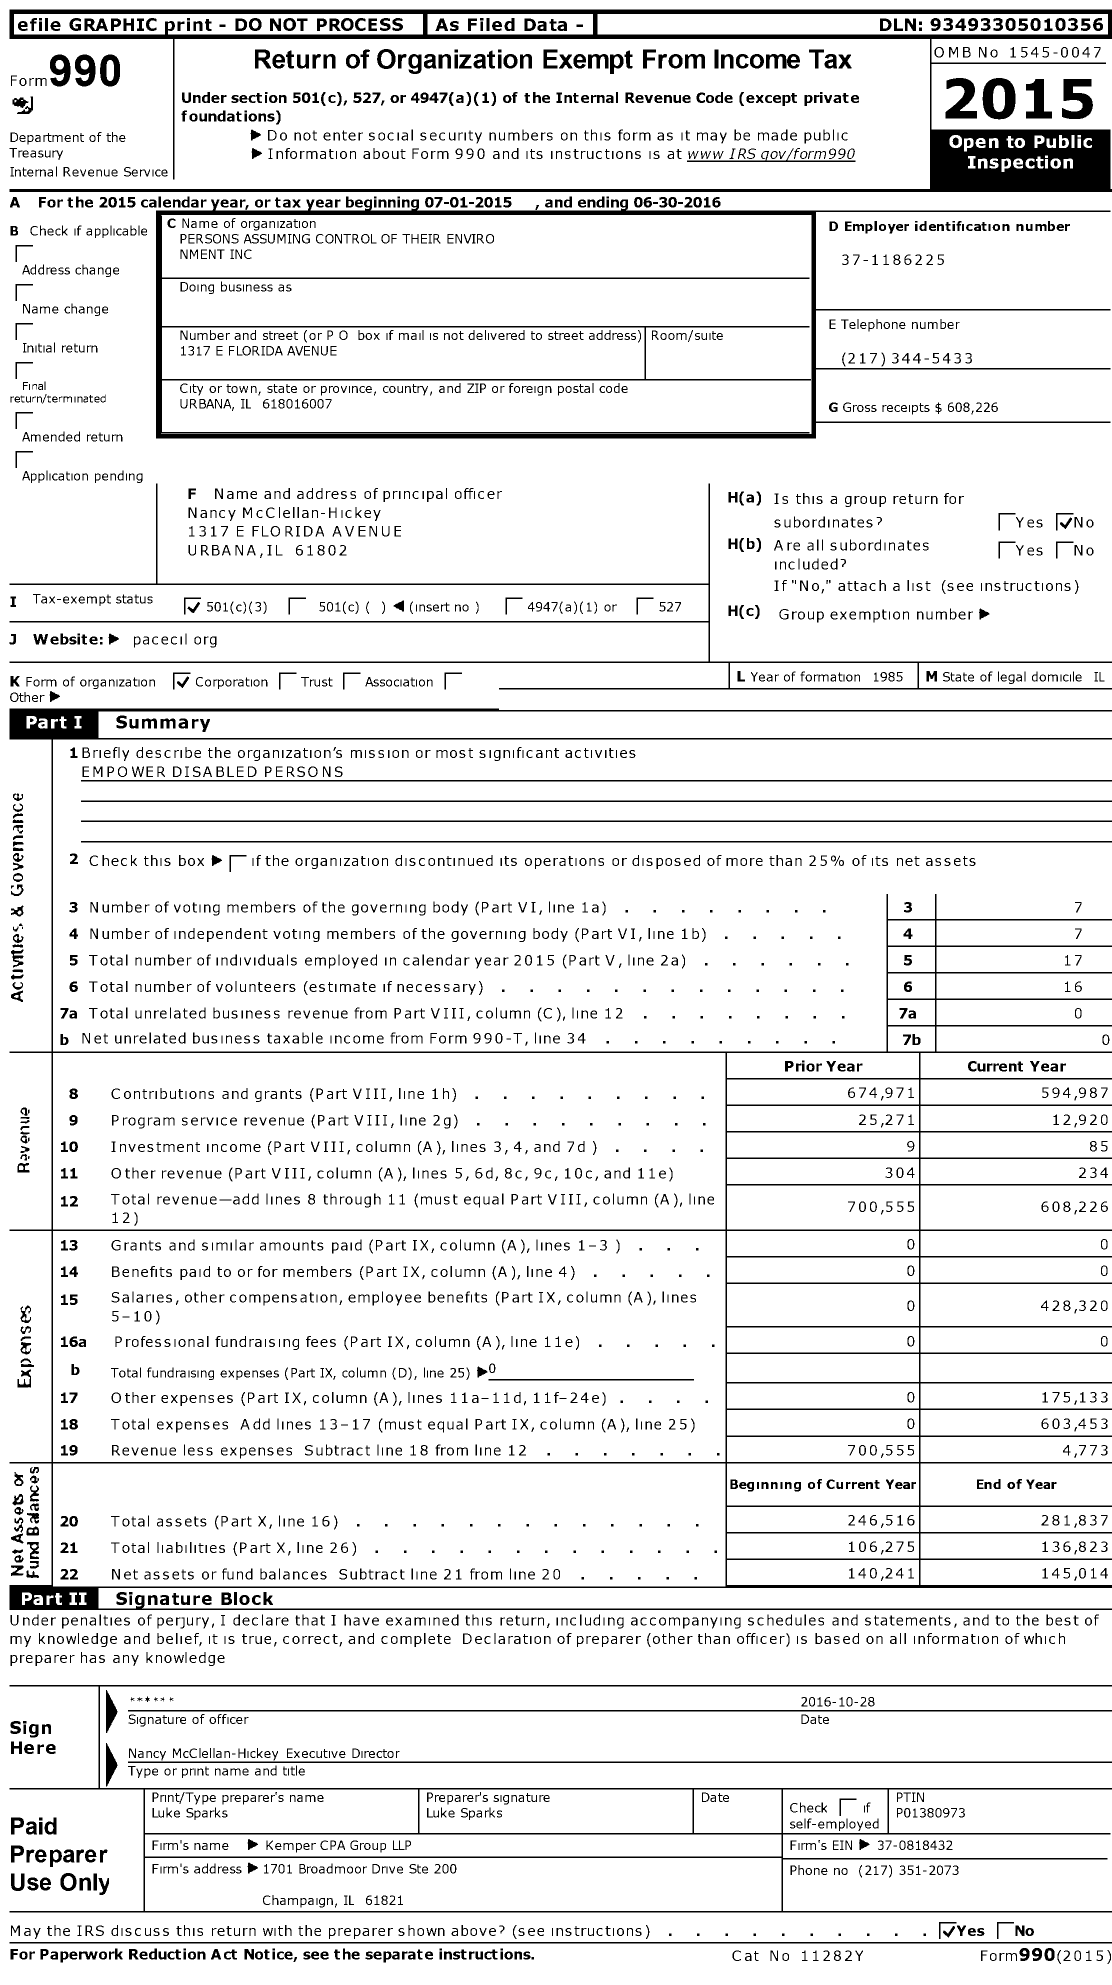 Image of first page of 2015 Form 990 for Persons Assuming Control of their Environment